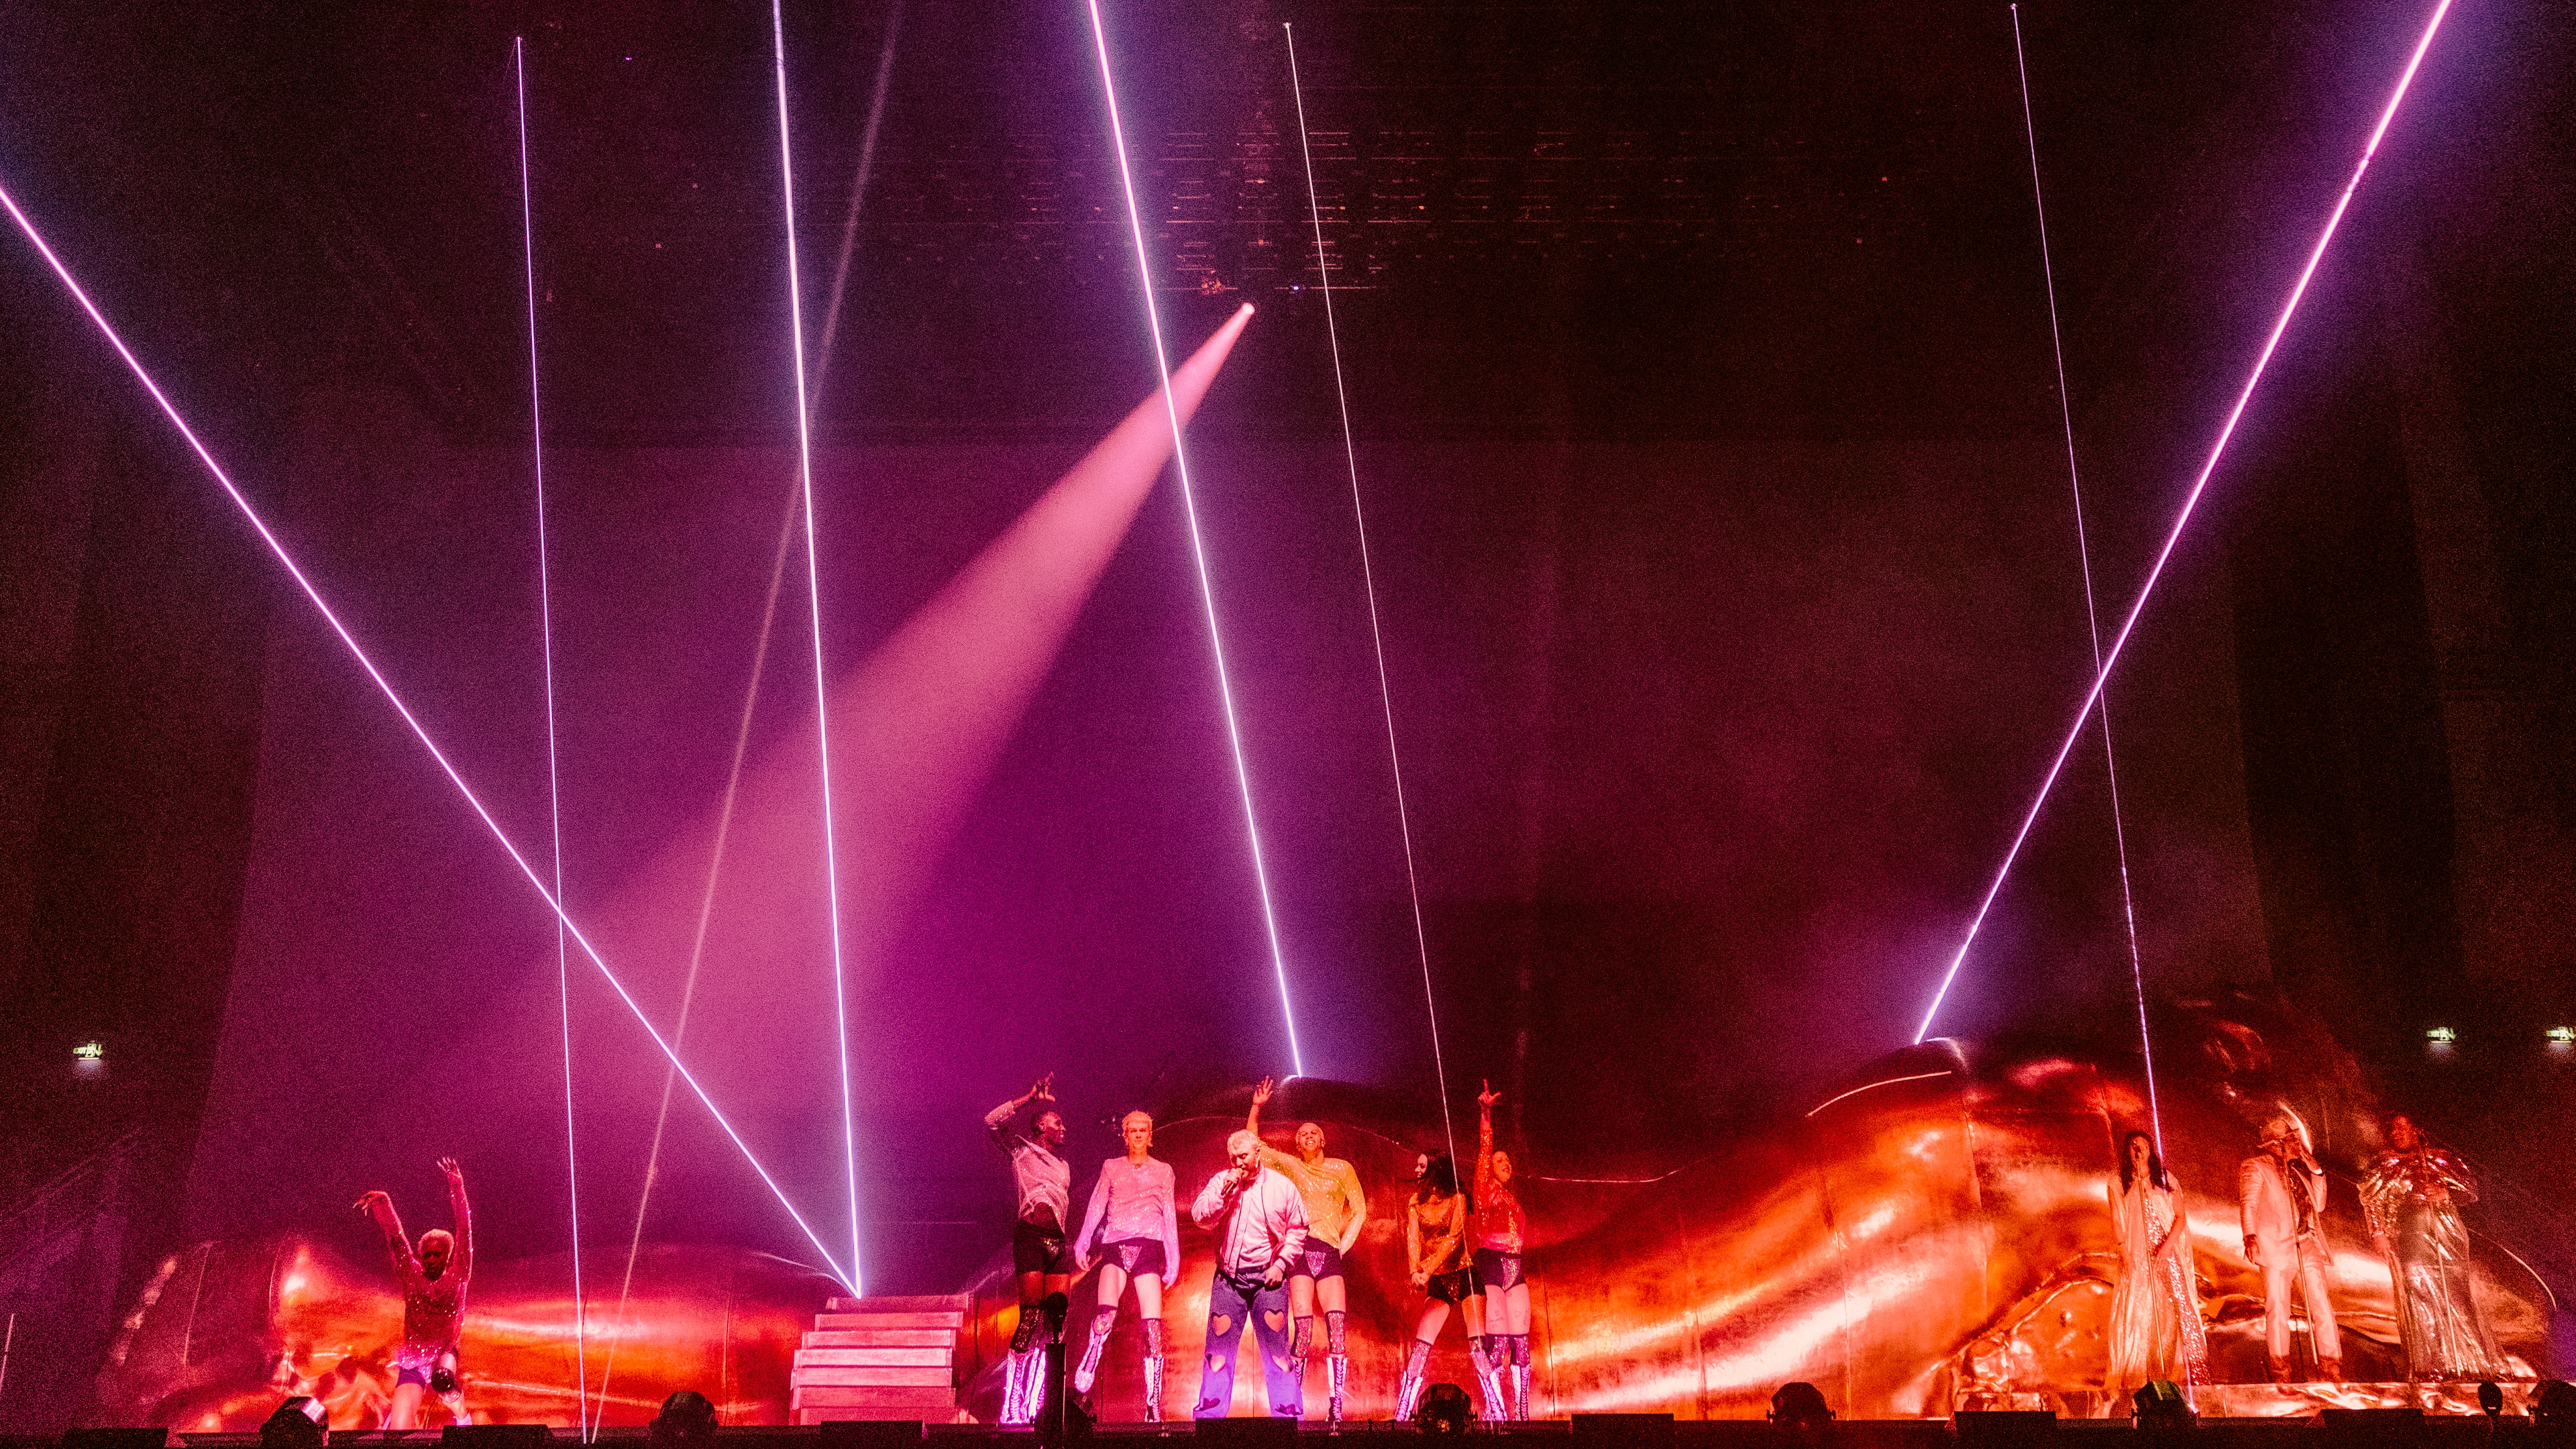 Sam Smith on stage in front of Gloria sculpture with purple lasers